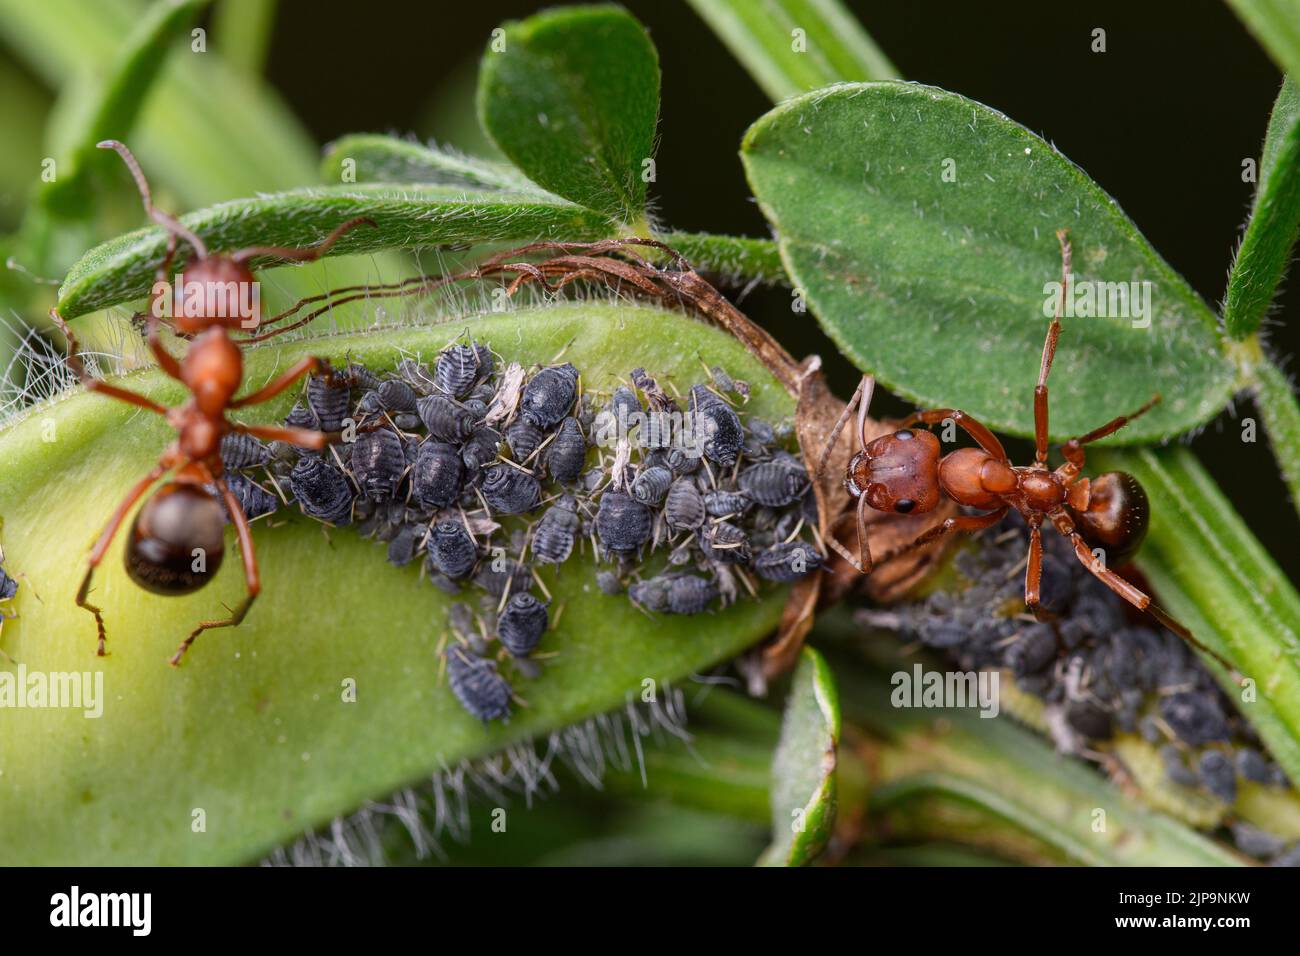 ant, aphid, symbiotic relationship, mutualismus, ants, aphids, relationsships, symbiotic relationships Stock Photo